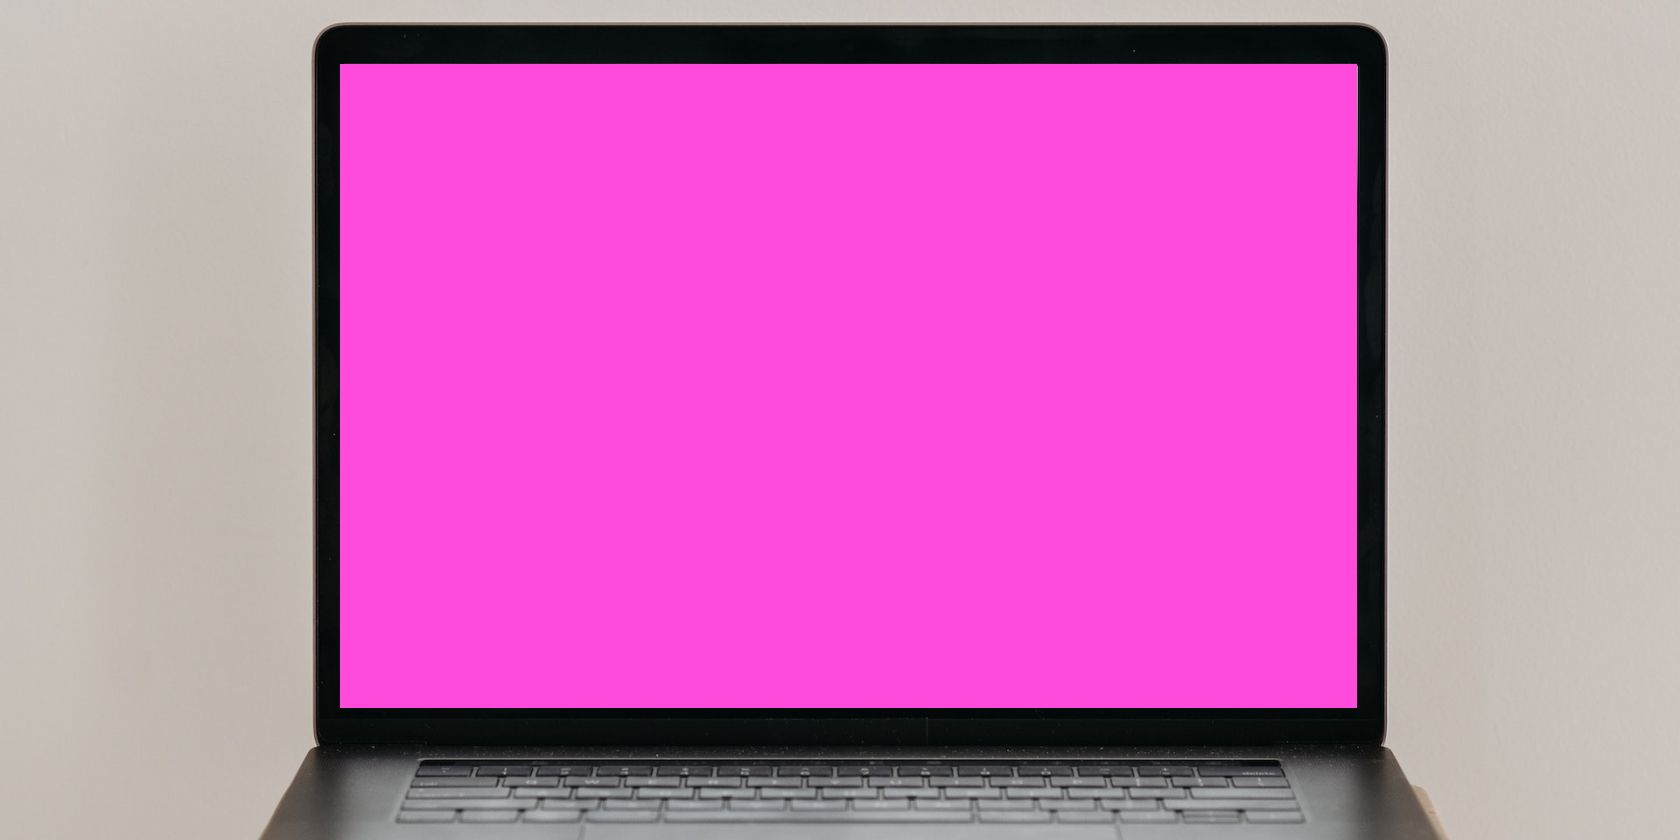 How to Fix the Pink Screen of Death Error on Windows